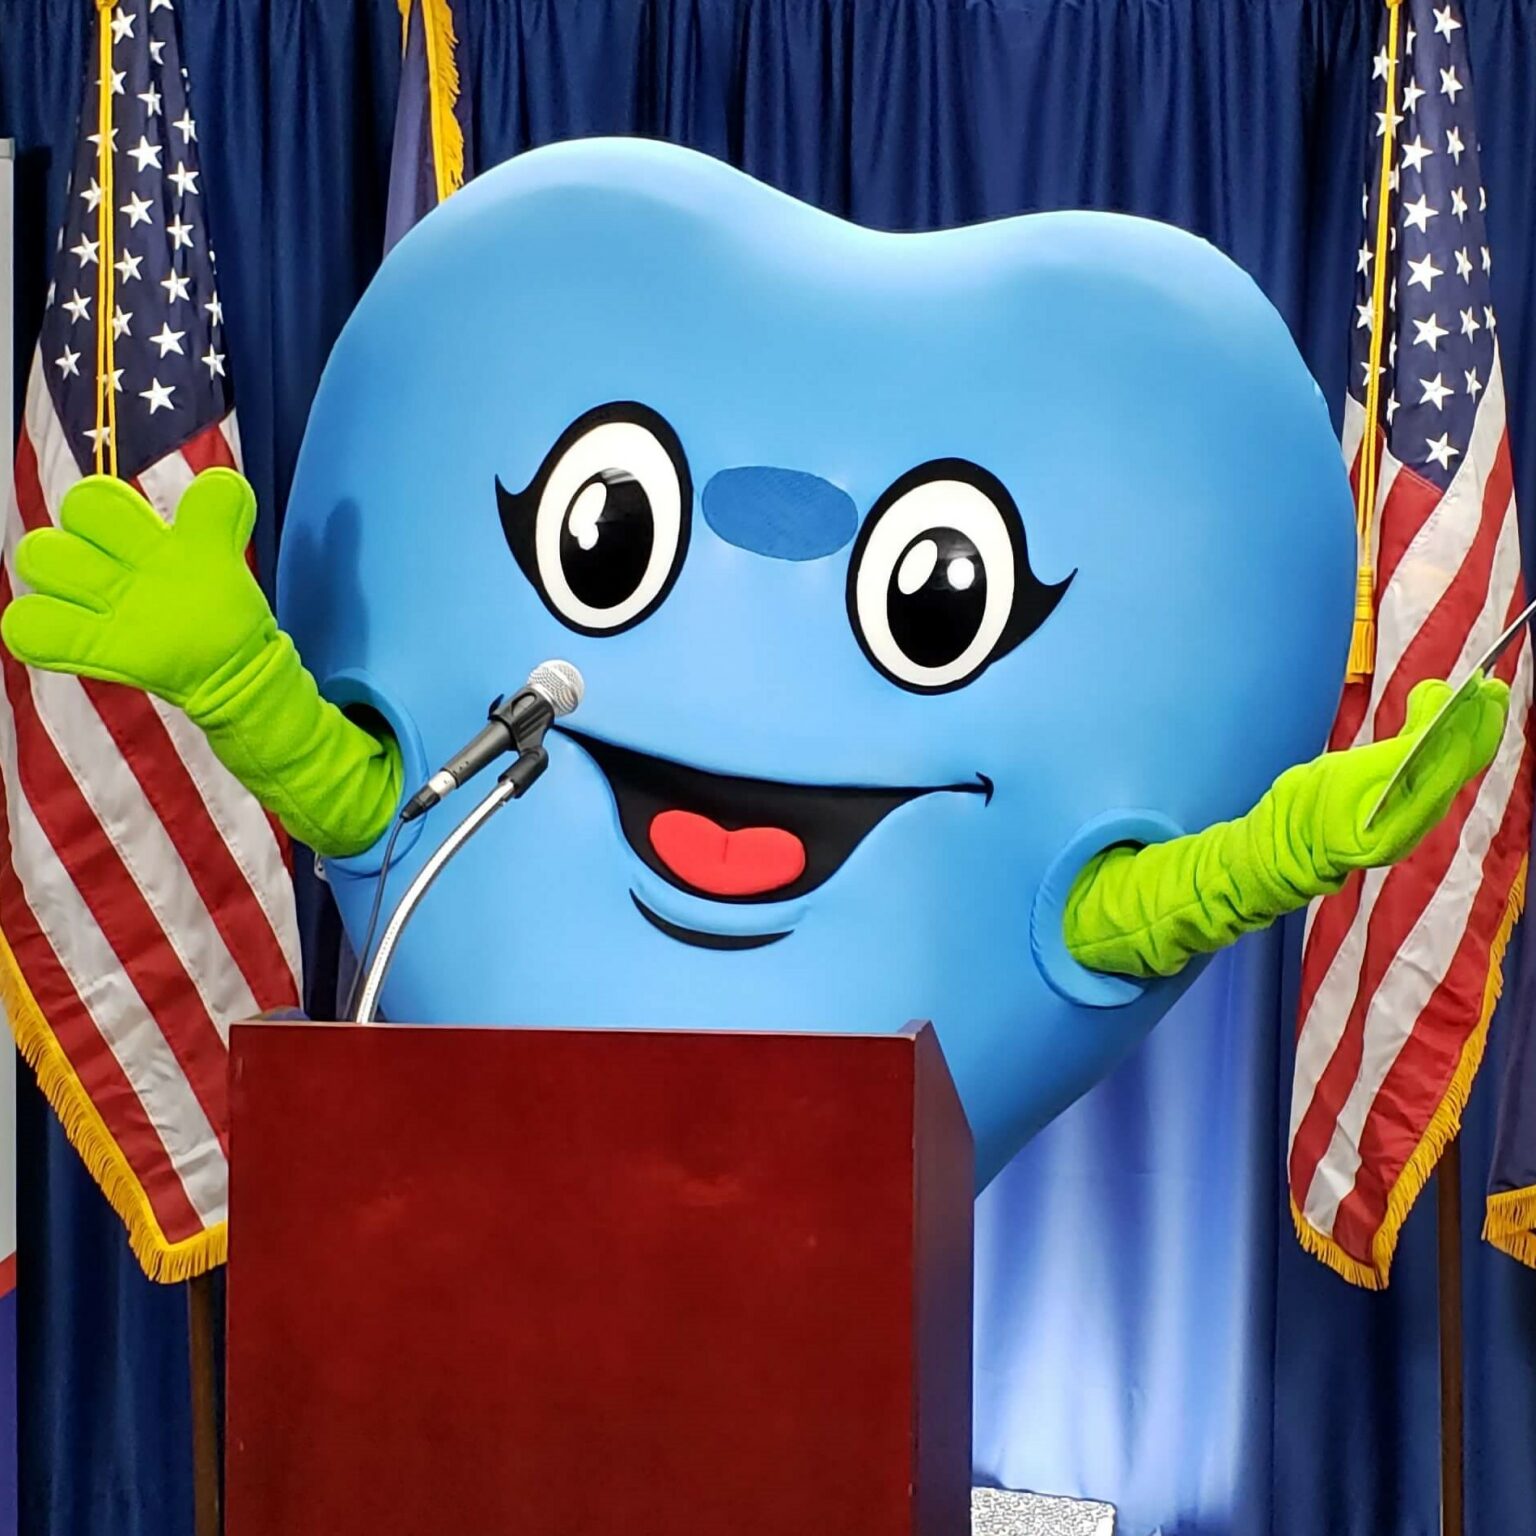 Blue heart-shaped mascot at podium with American and Michigan flags behind them